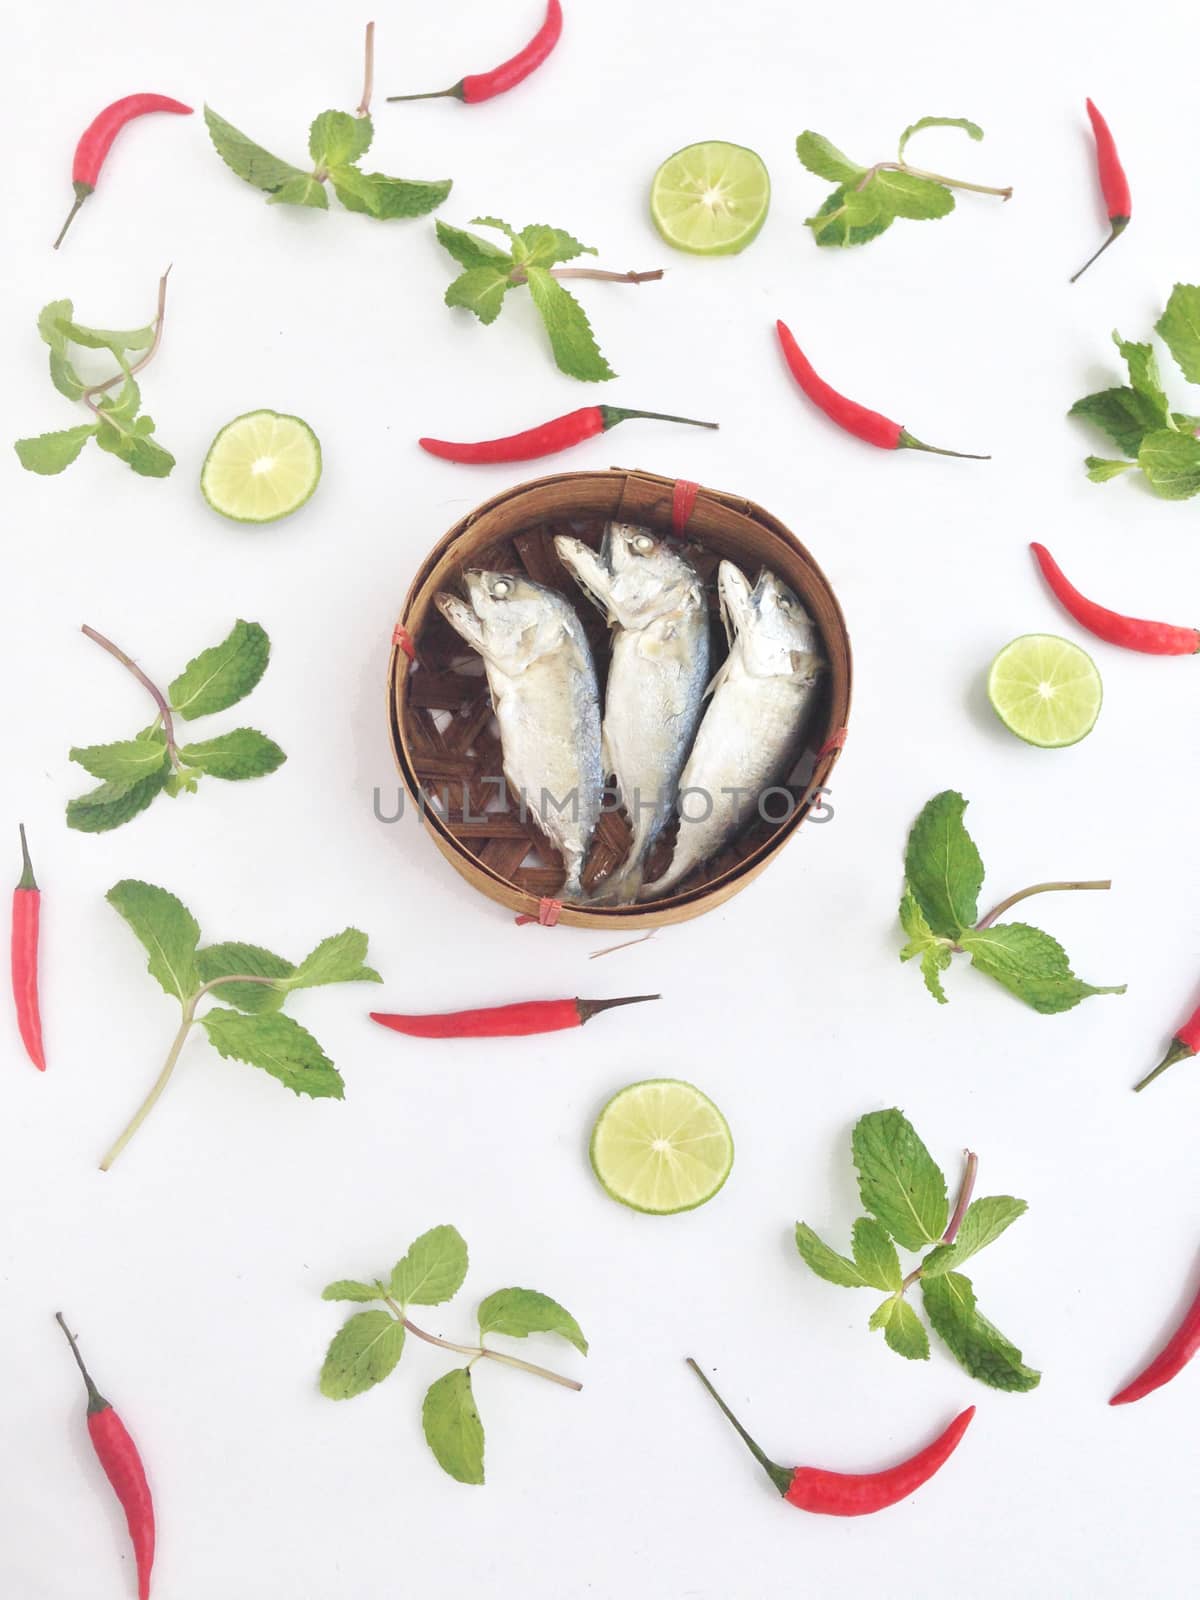 short mackerel on fish basket with chili paper mint and lime